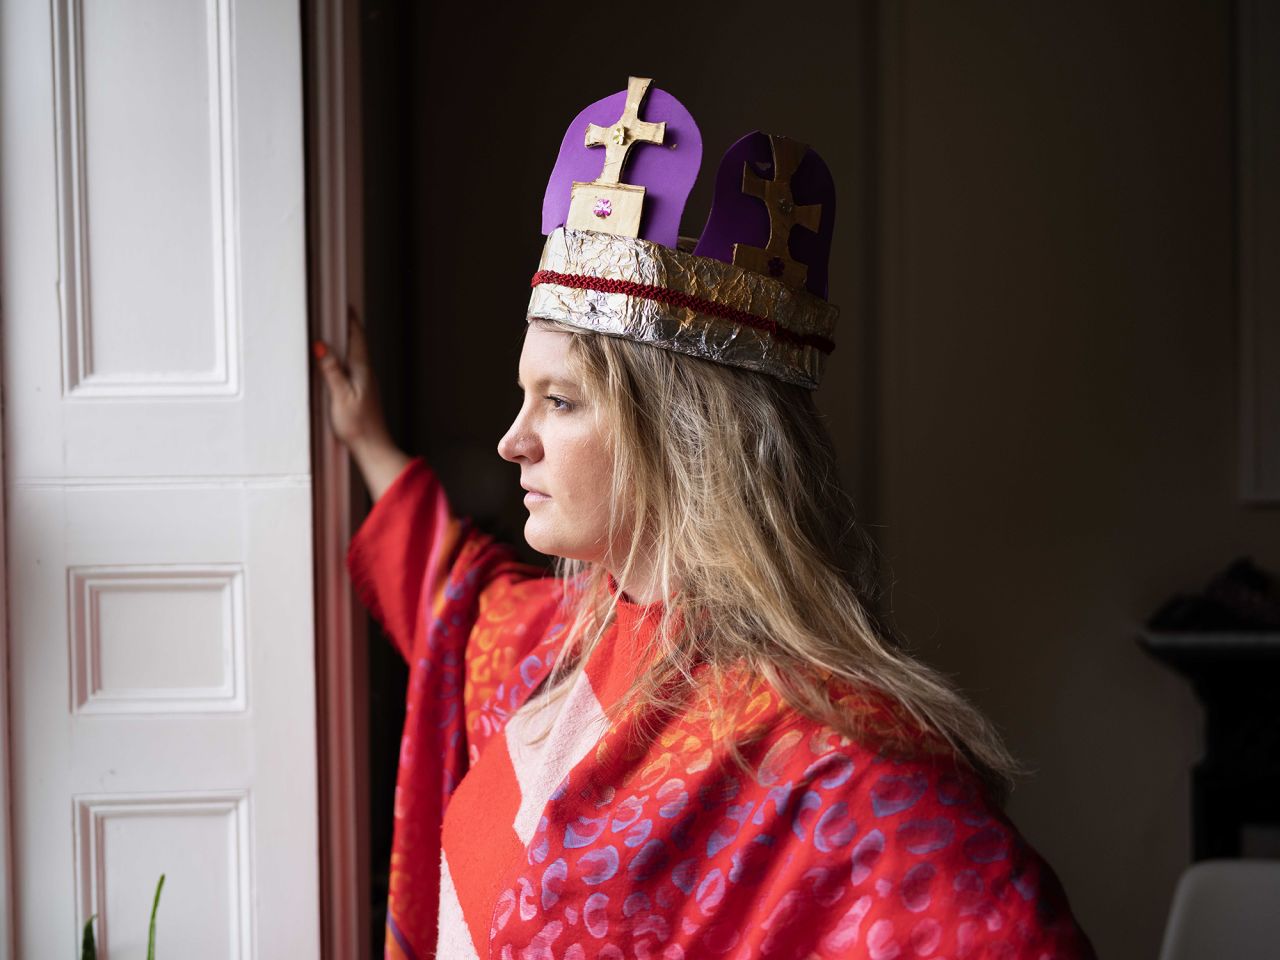 Chloe enlisted the help of her kids to make crowns for the weekend. "The pageantry and procession was great to watch yesterday," she said. "He looked quite emotional. Today's street party is a nice excuse to hang out with friends."